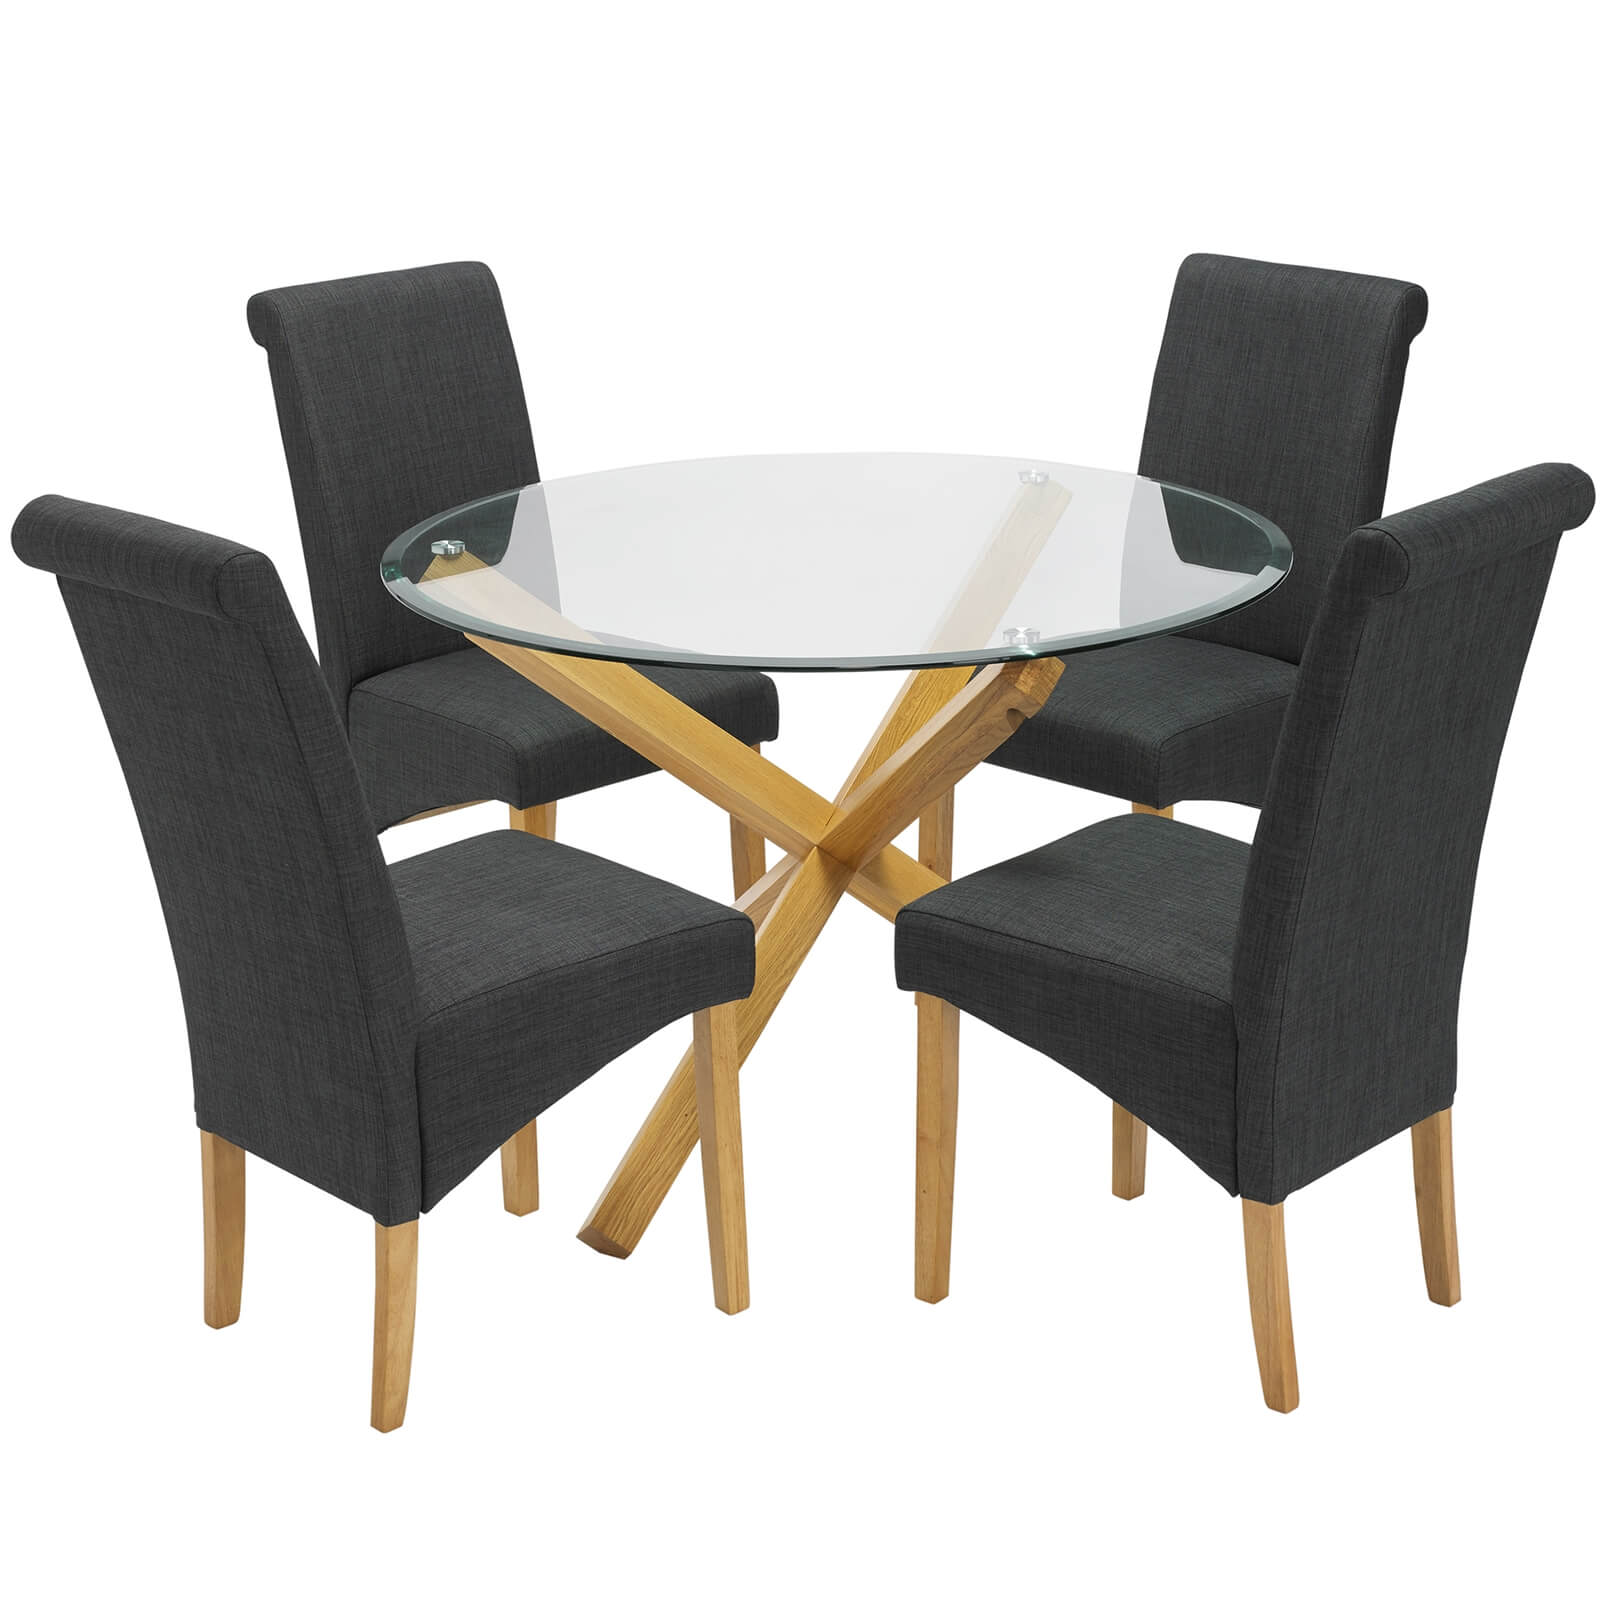 Oporto 4 Seater Dining Set - Amelia Dining Chairs - Grey